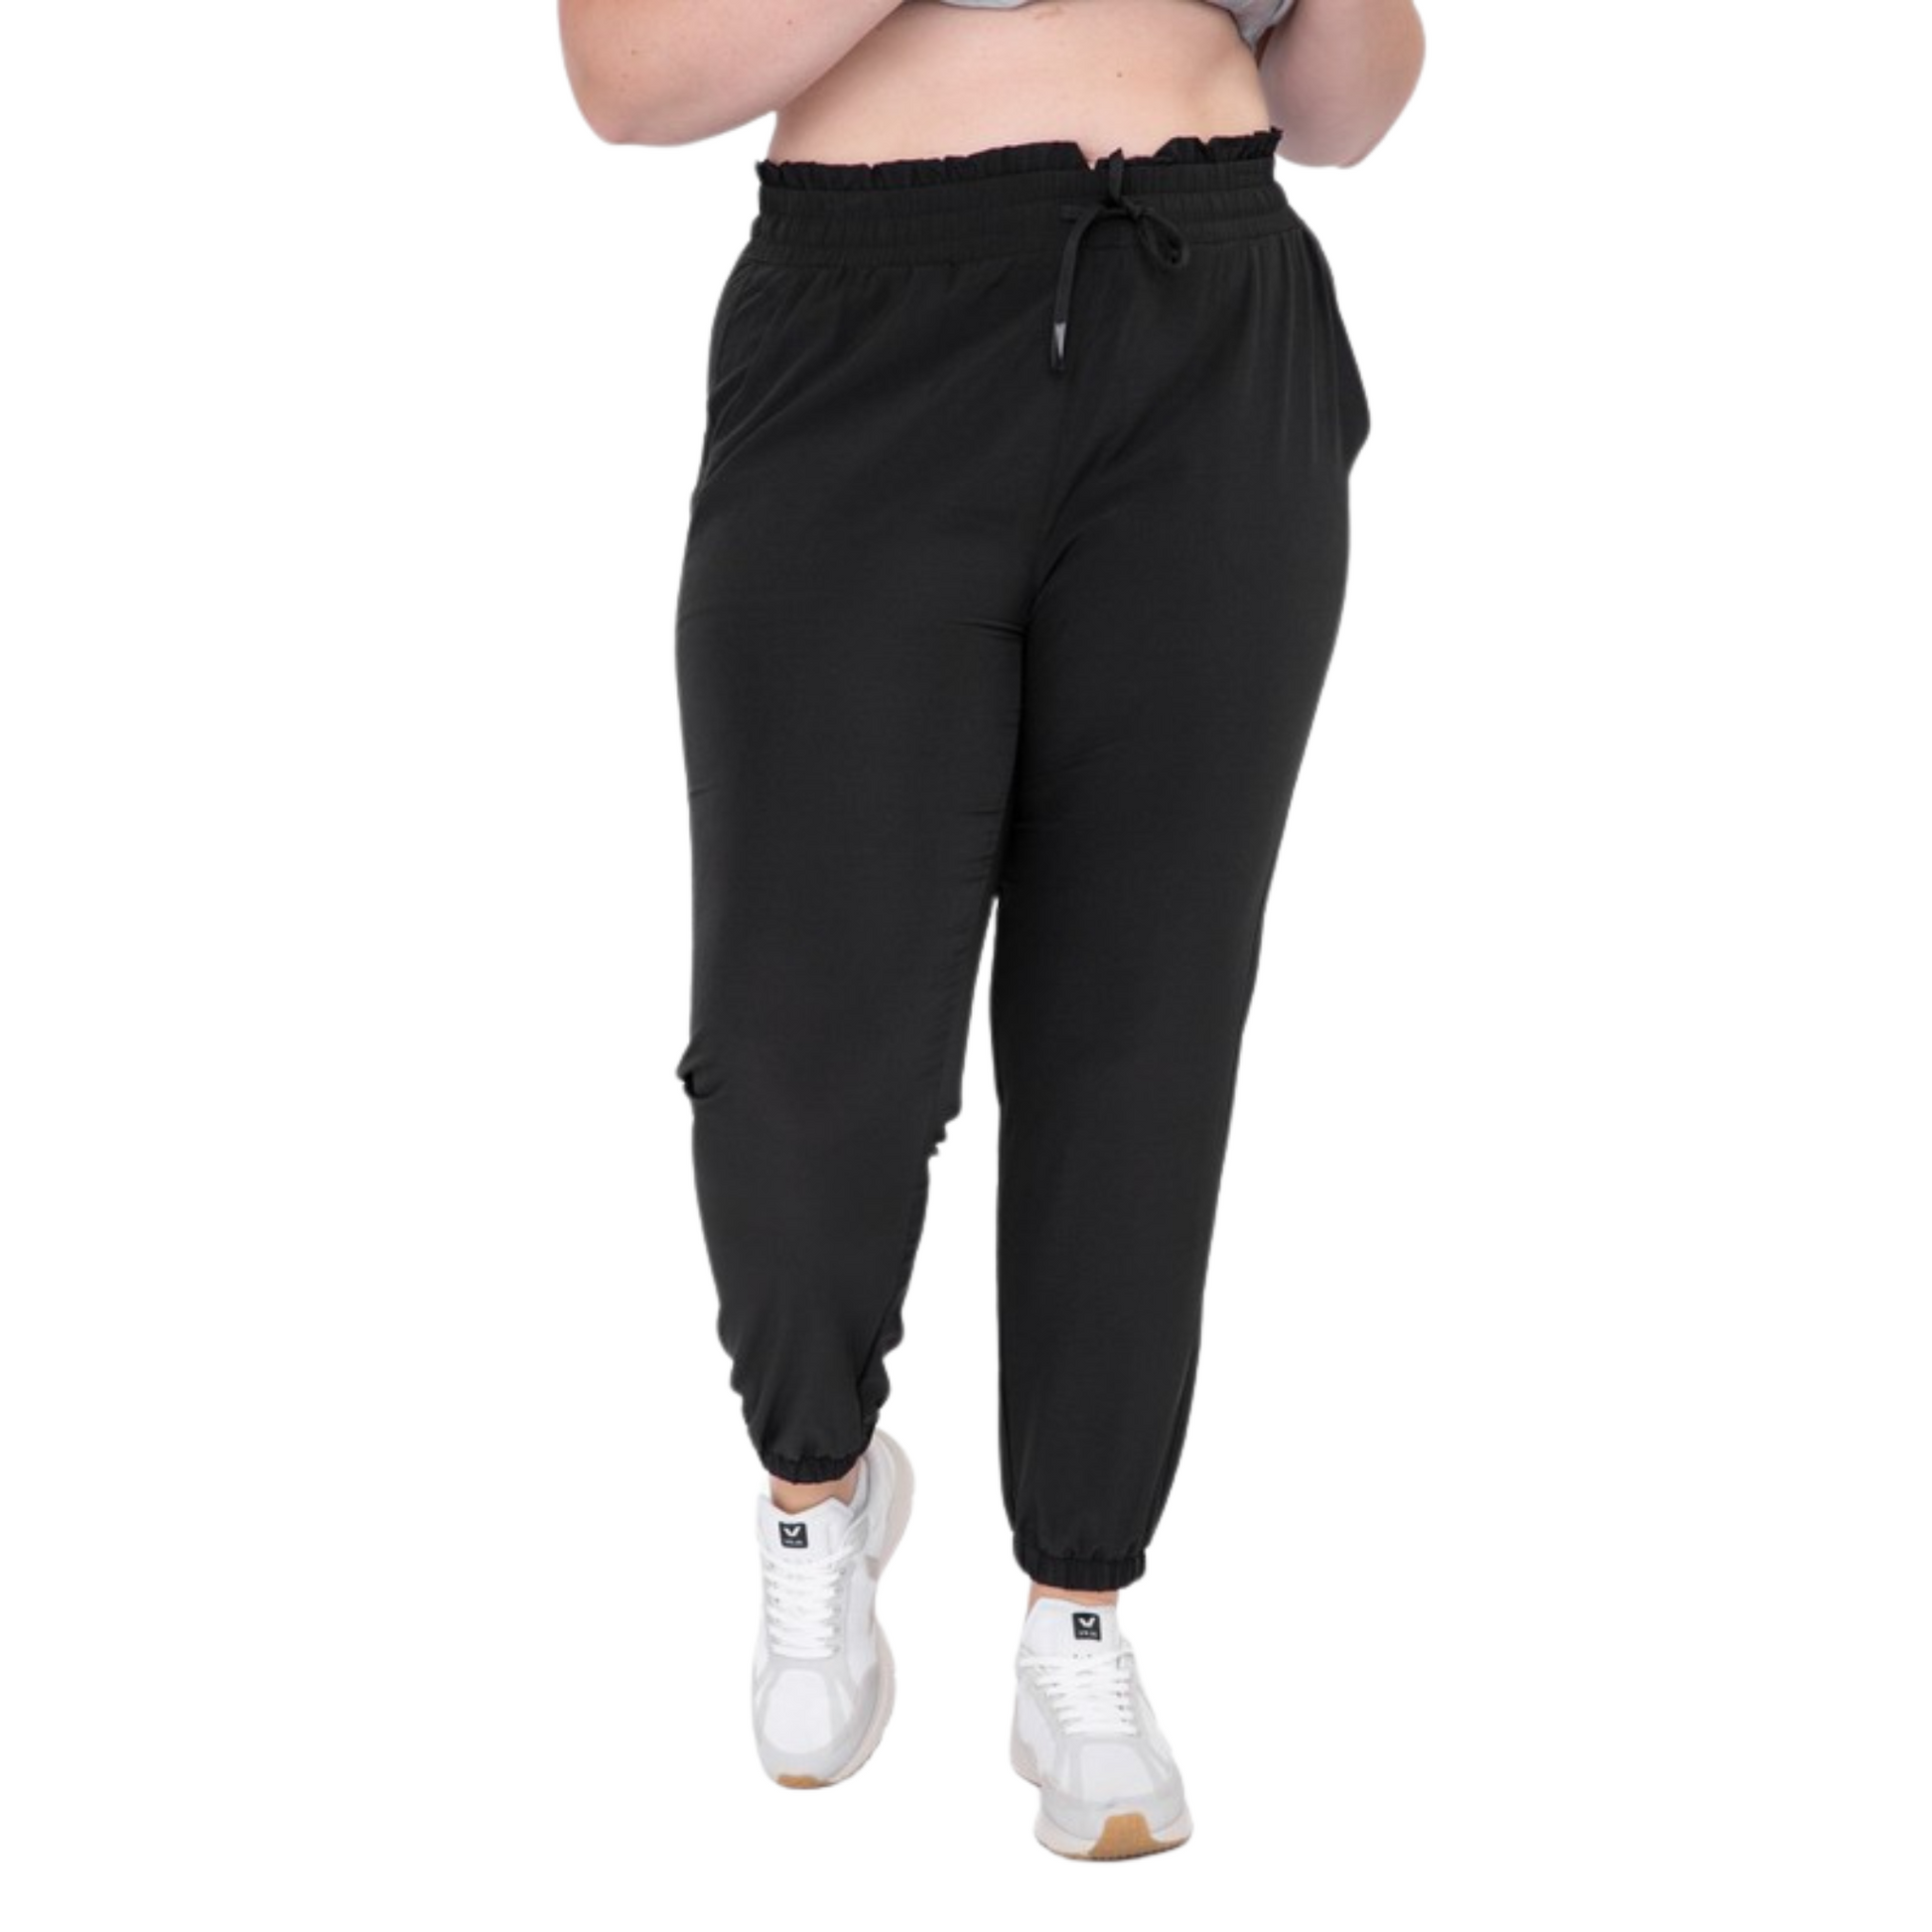 Be ready for your next adventure with these Curvy High Waisted Joggers. Crafted from premium fabric, they feature a high and elasticized waistband with drawstring closure, slanted pockets, and 7/8 length with cuffed ankles for a stylish look. Available in classic black color.